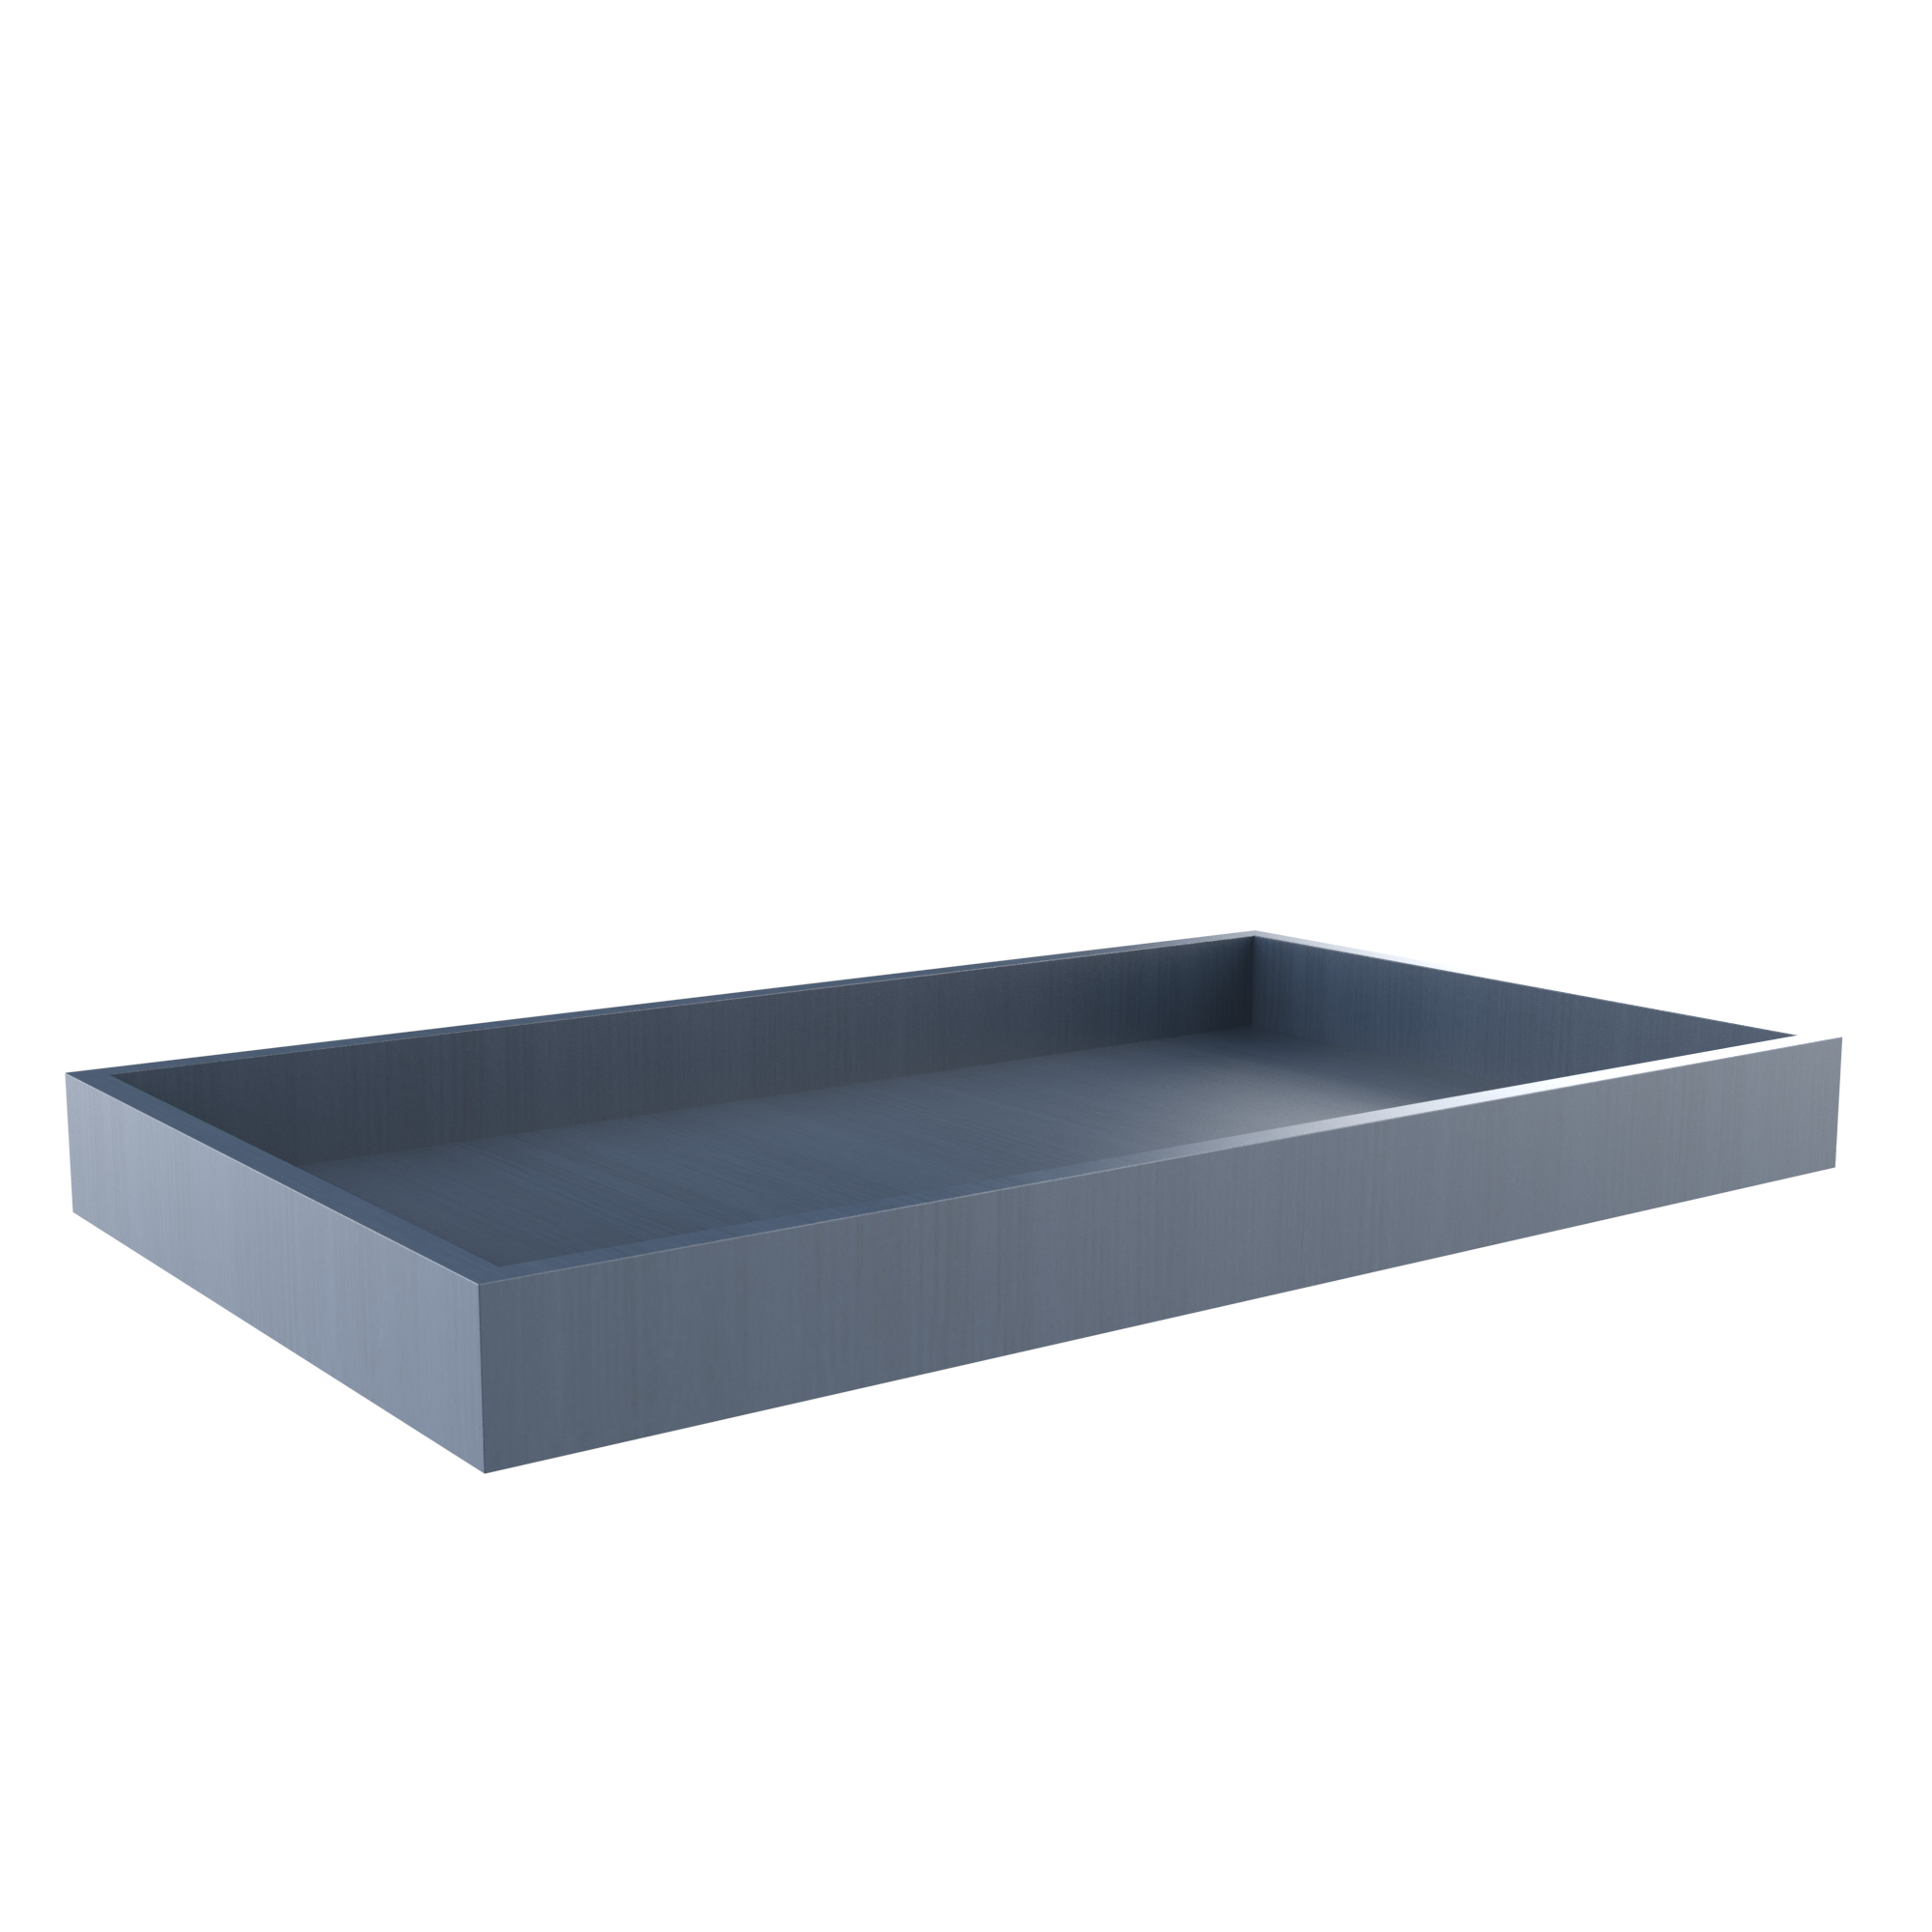 Roll Out Tray for Cabinets - Fits B36 - Blue Shaker Cabinet Cabinet